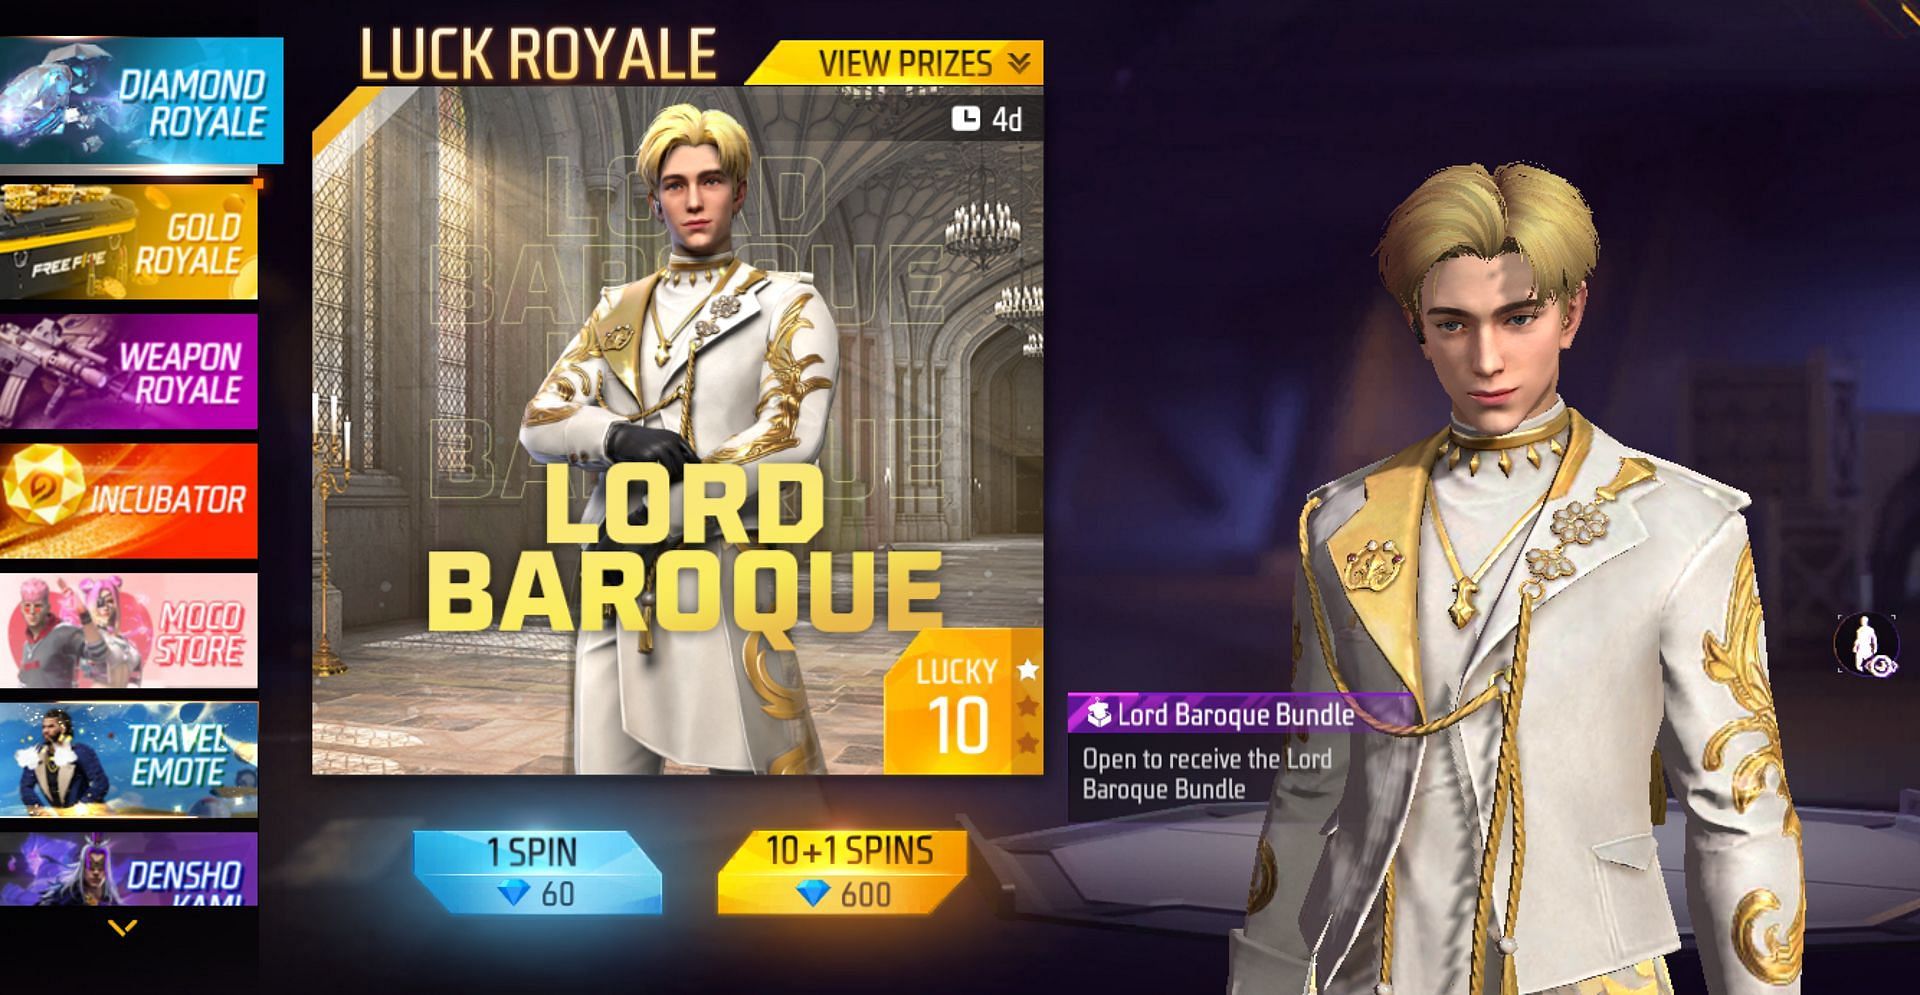 Select the Weapon Royale from the available Luck Royale (Image via Garena)